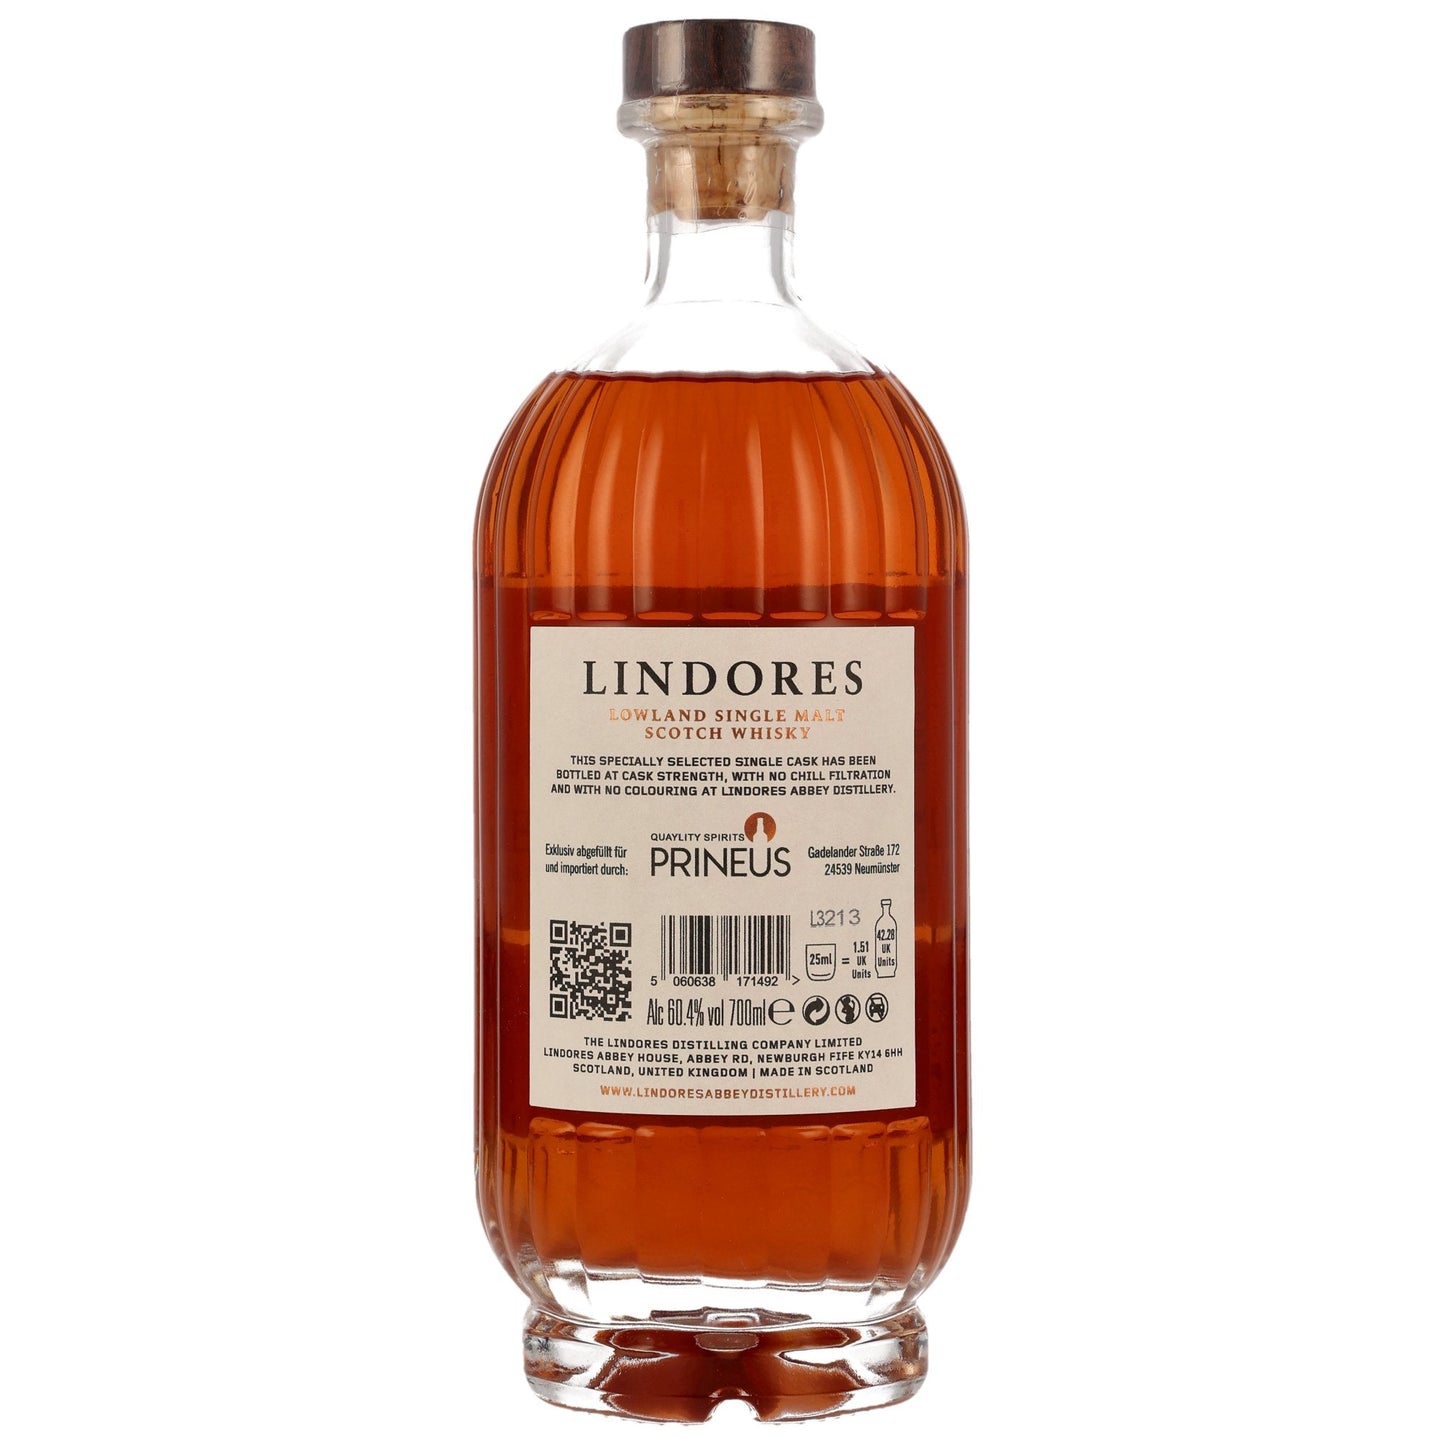 Lindores | The Exclusive Cask | 2018/2023 | Ruby Port #626/2018 | 60,4%GET A BOTTLE